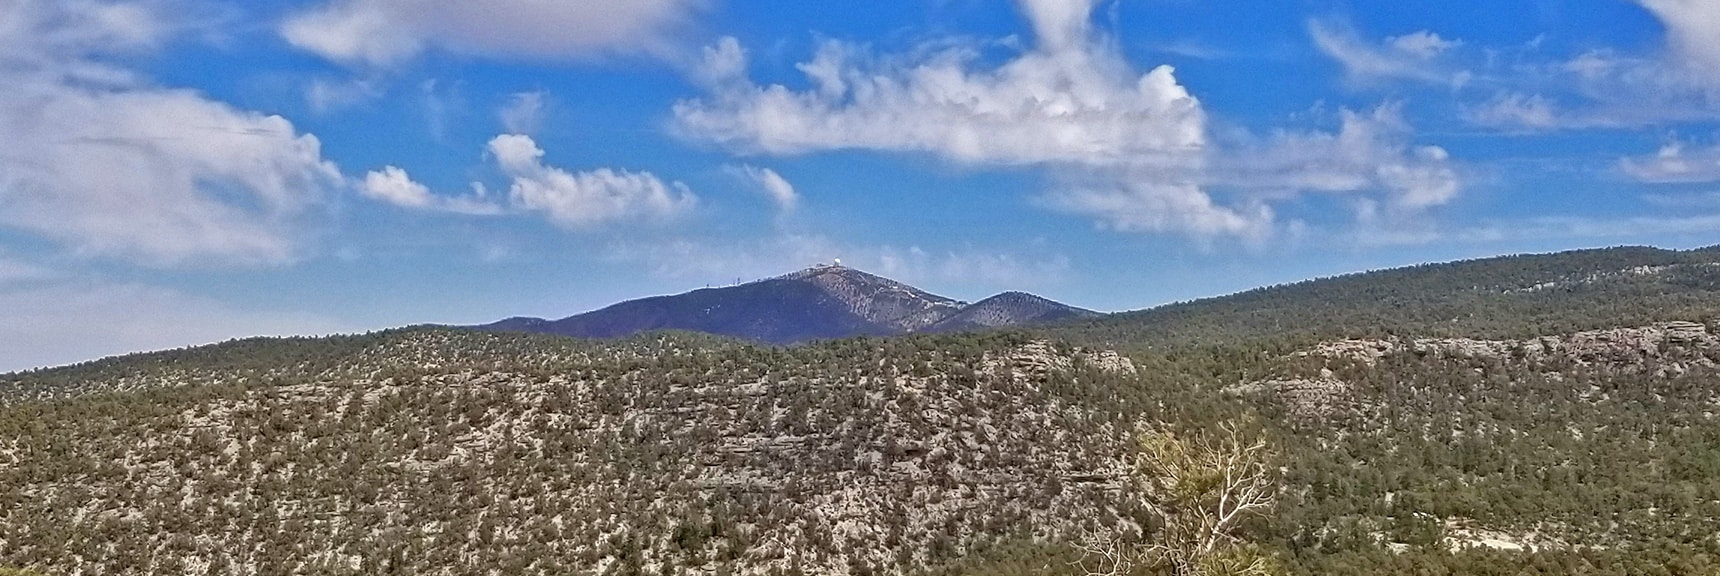 Angel Peak Viewed from an Initial Rise on the Mud Spings Loop Trail | Sawmill Trail to McFarland Peak | Spring Mountains, Nevada